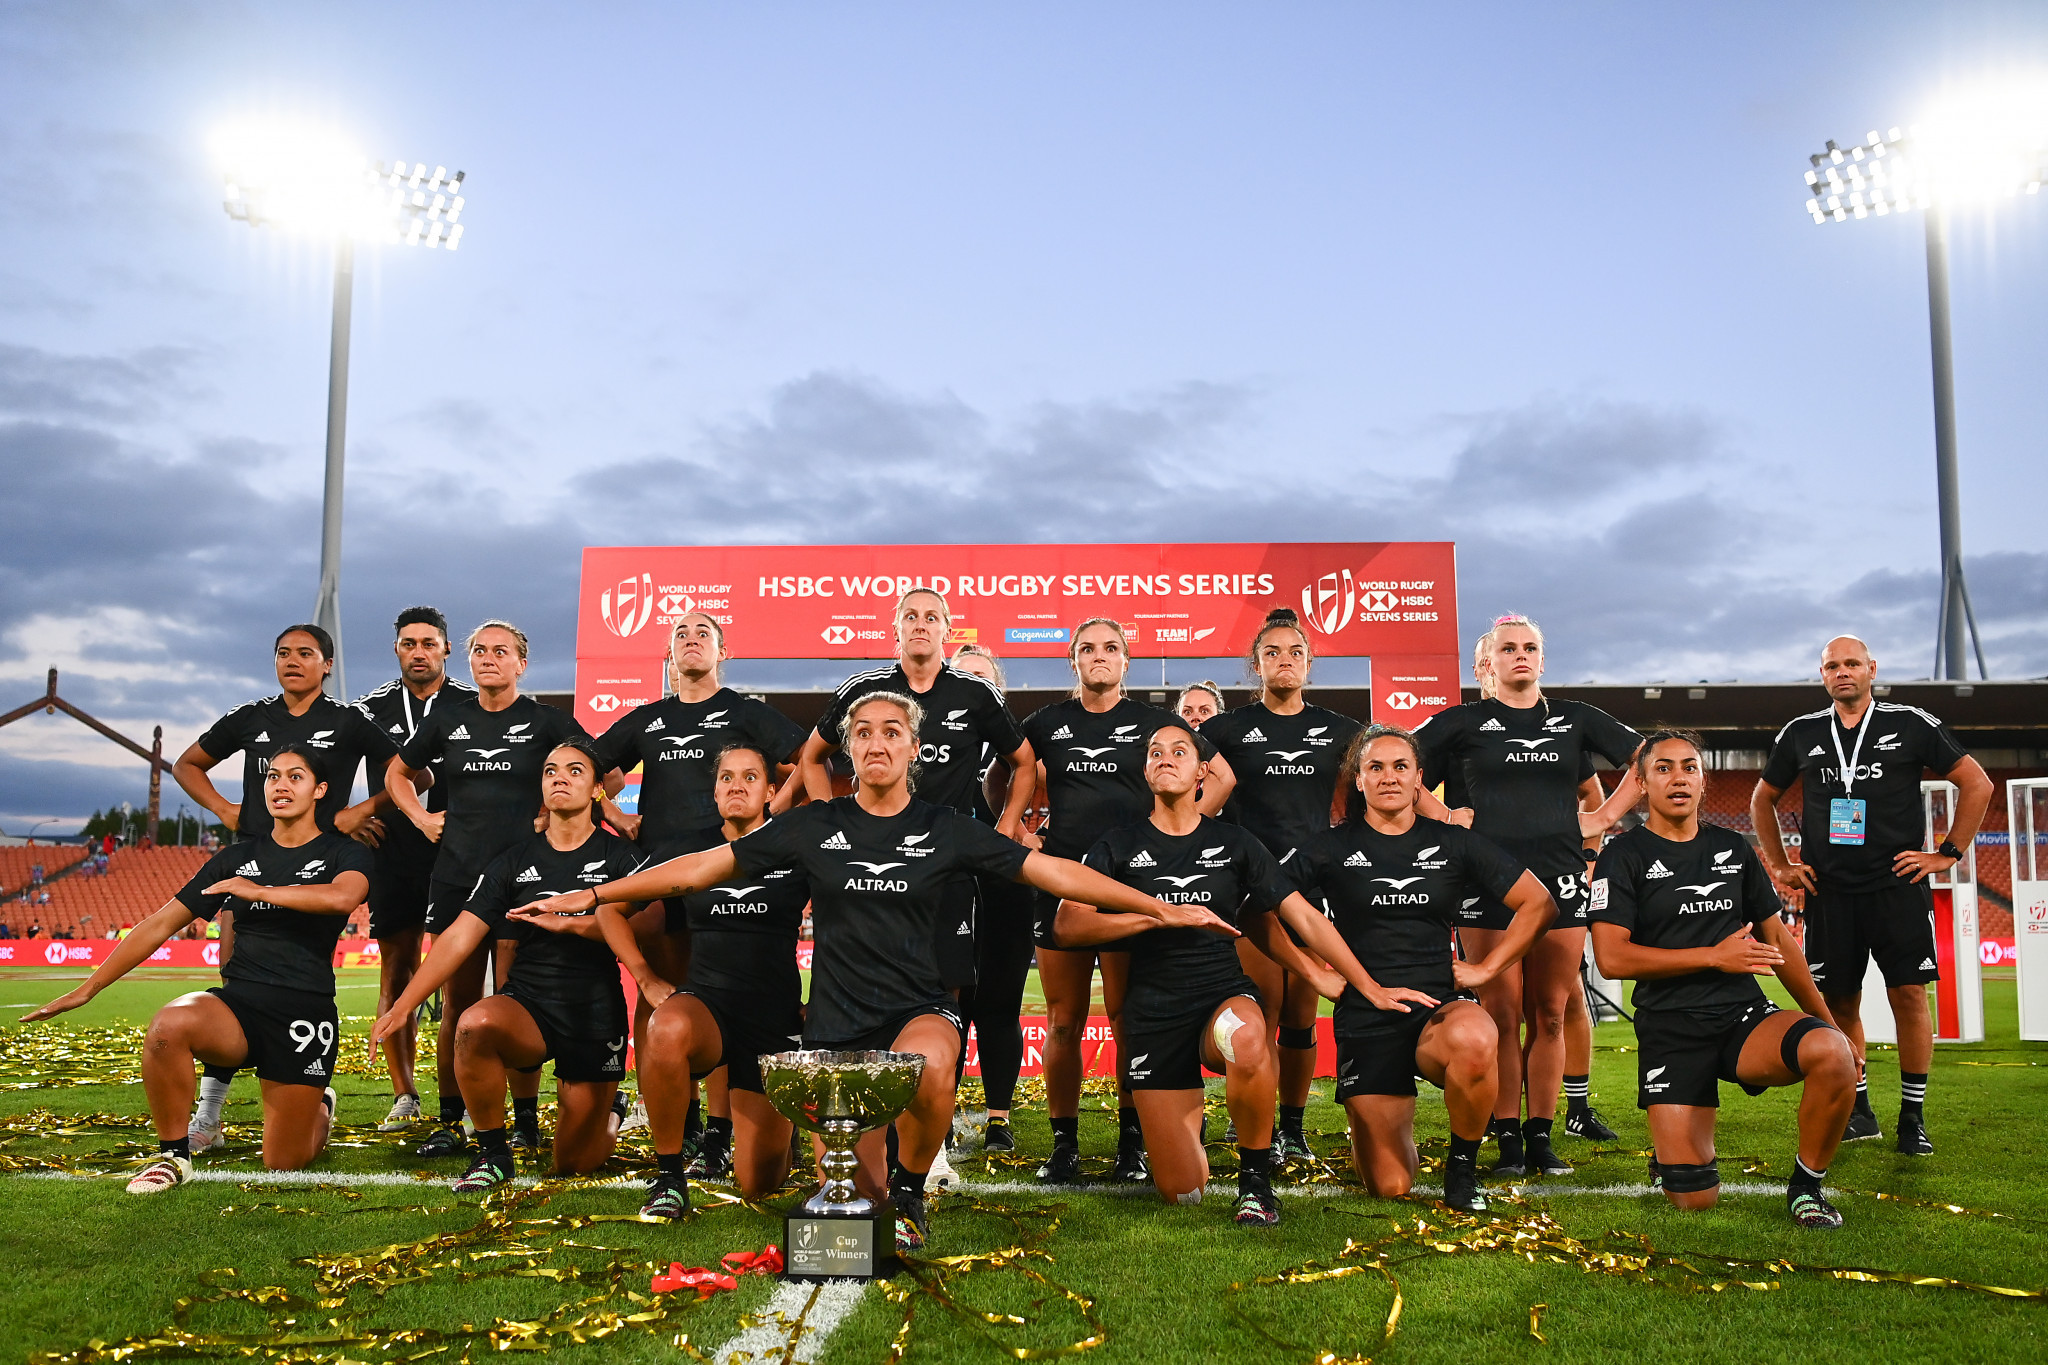 New Zealand's players perform the haka sfter winning the women's World Rugby Sevens Series trophy on home soil in Hamilton ©Getty Images 